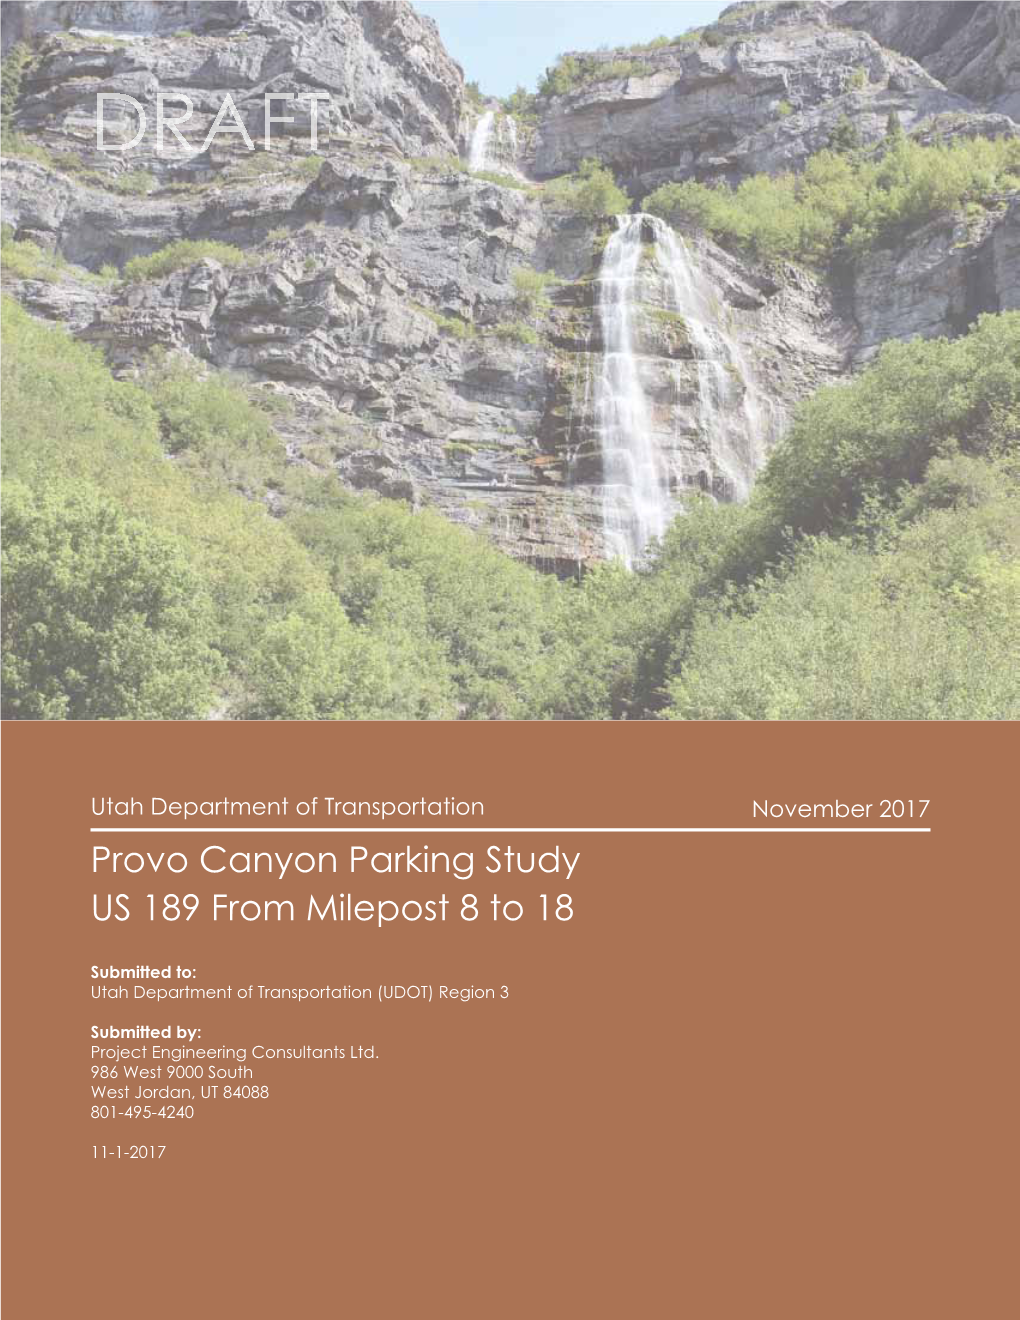 Provo Canyon Parking Study US 189 from Milepost 8 to 18